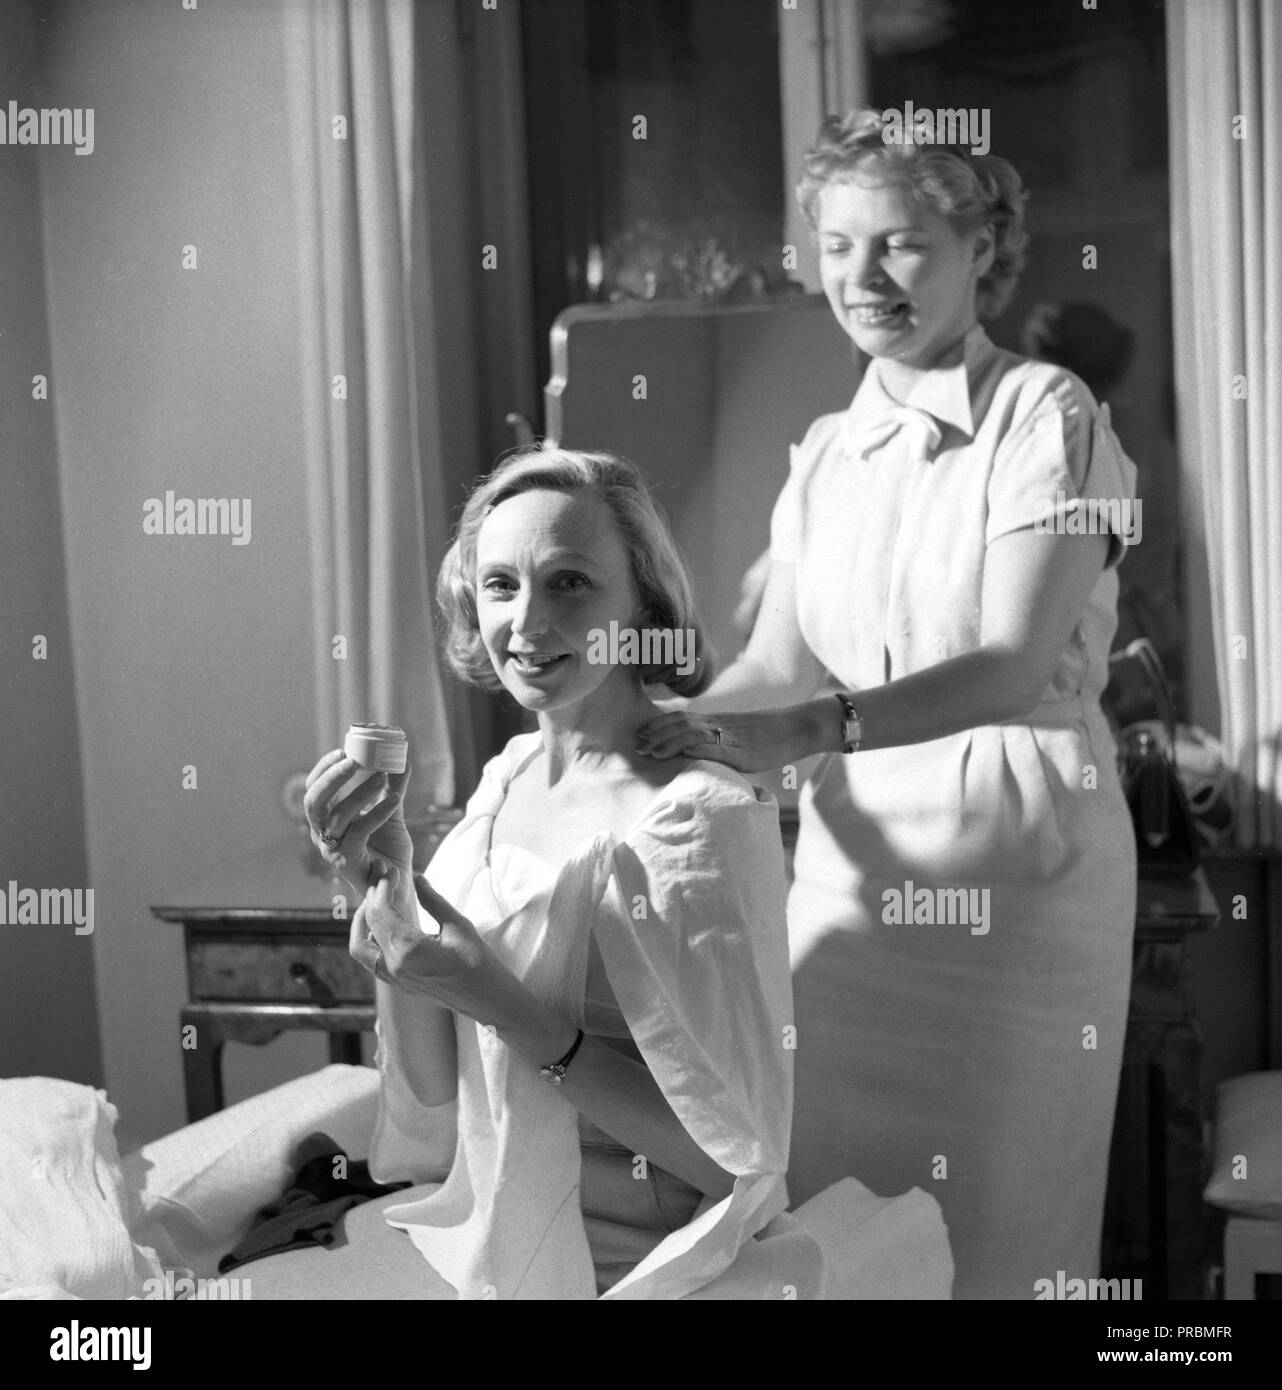 Inga Tidblad. (1901-1975)  Swedish actress, pictured here when getting a massage 1952. Ref 2169 Stock Photo